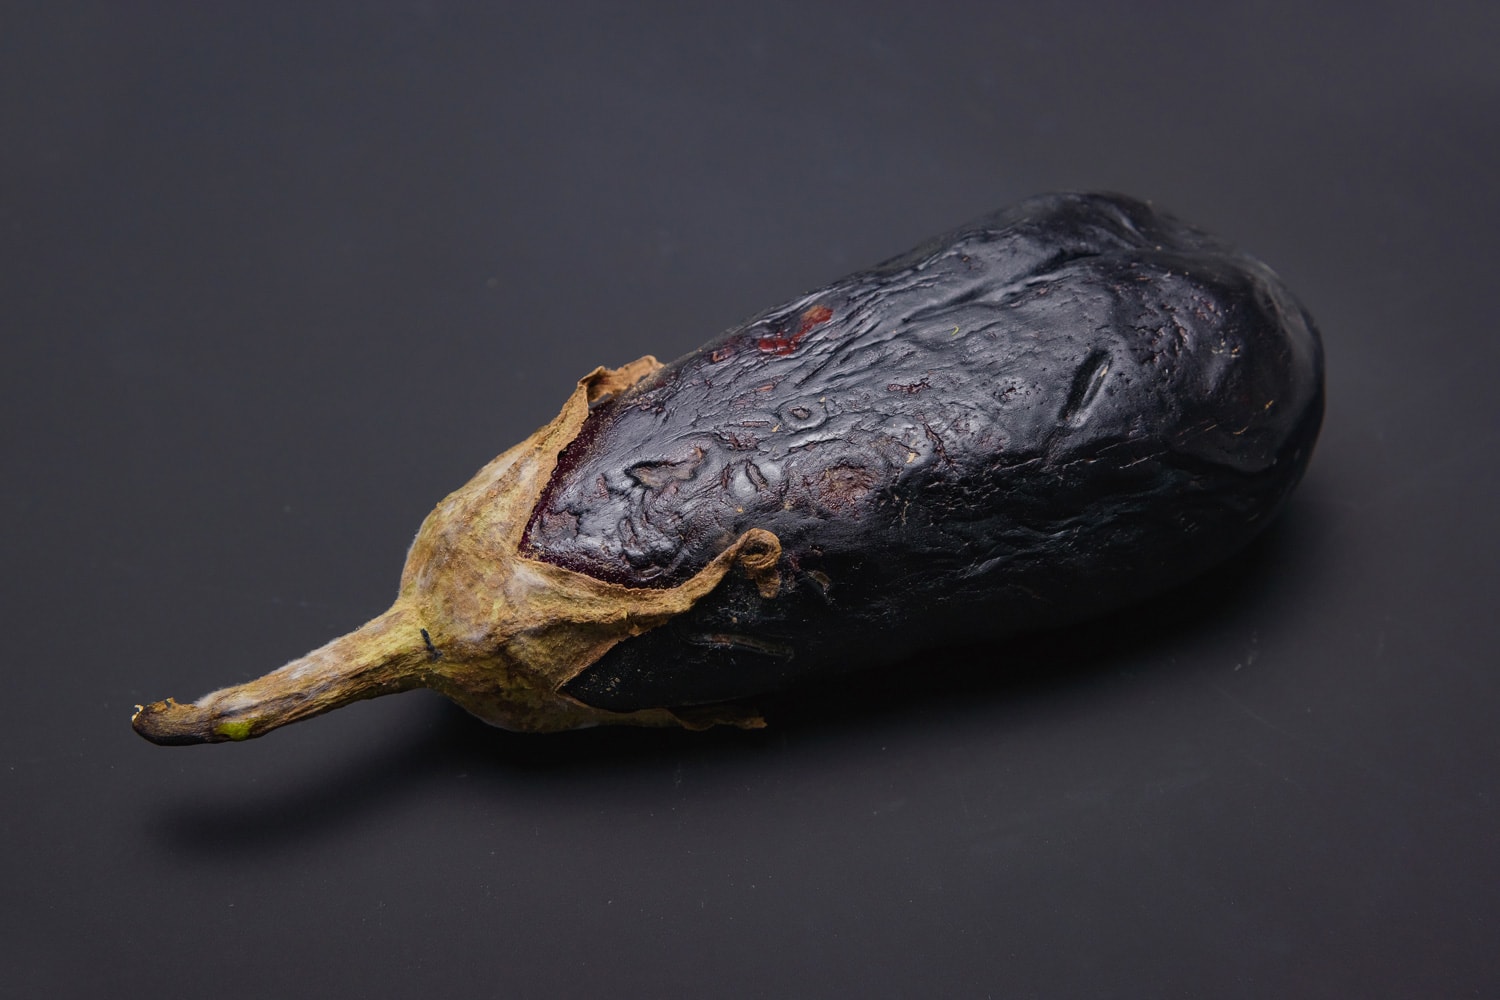 Spoiled aubergine on a black background. Mold on the eggplant.